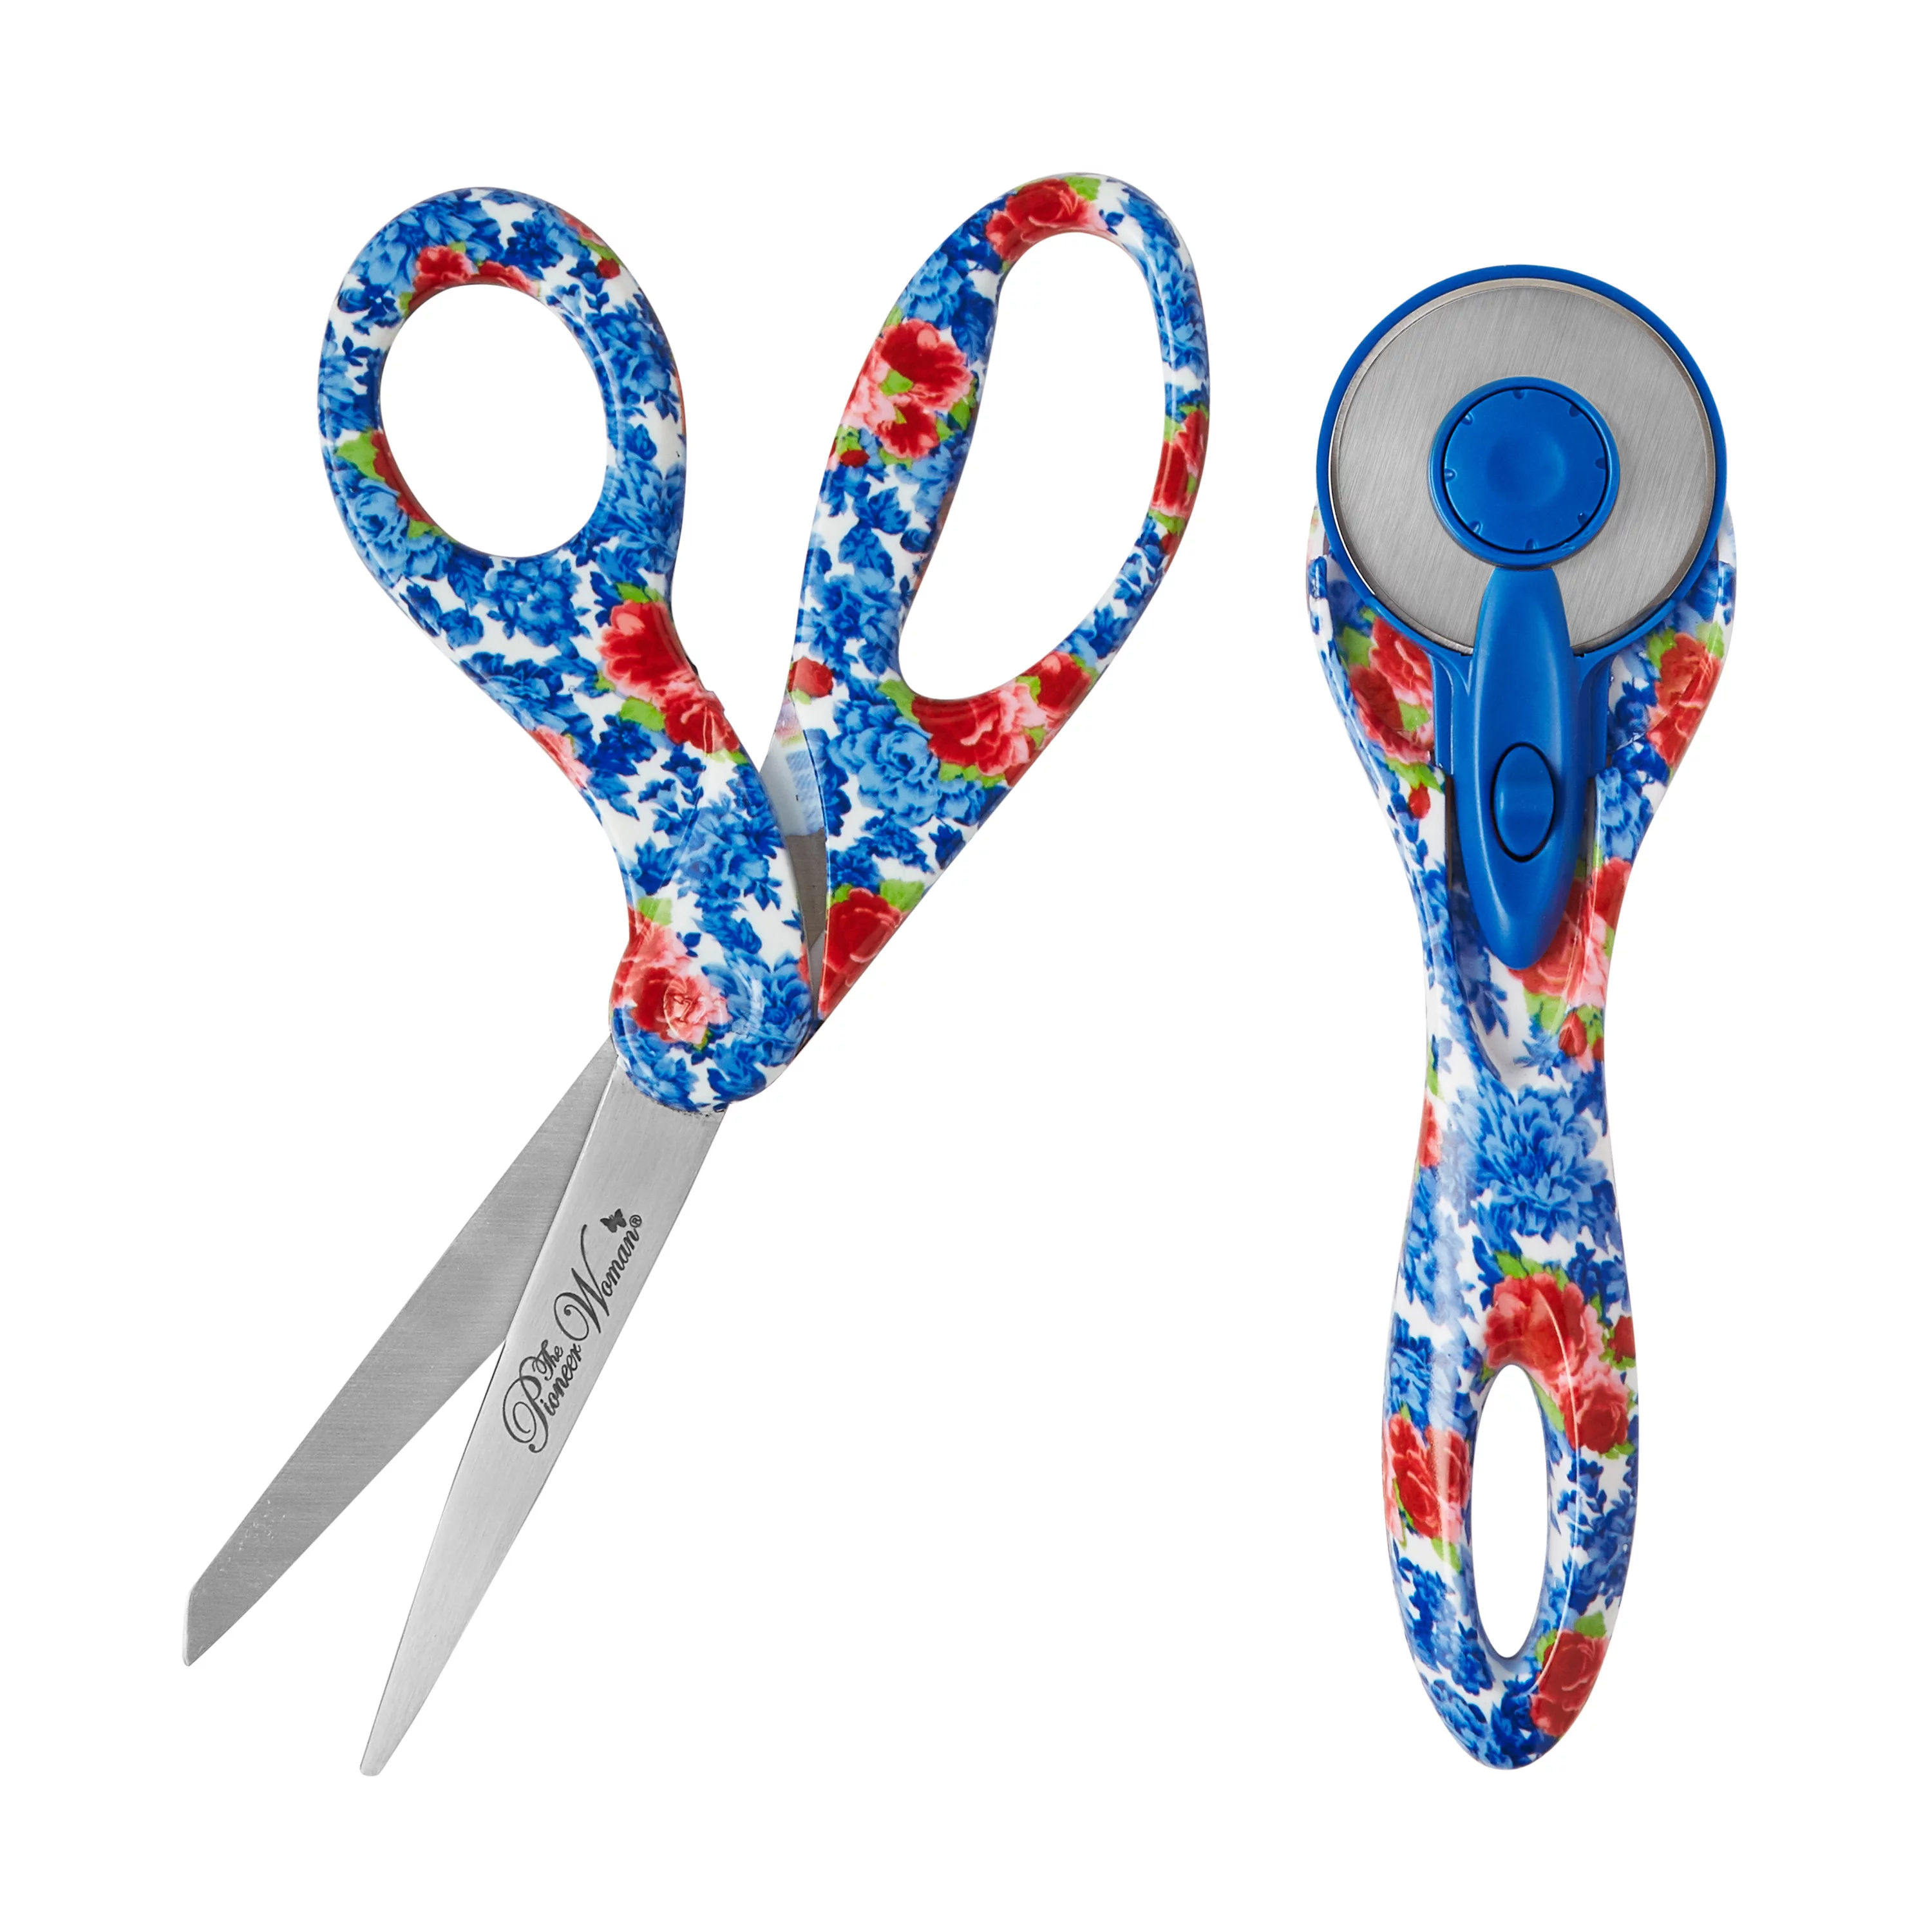 Wholesale Chinese Style Flower Scissors Portable Folding Type For Students,  Children, And Office Use Safe Stained Glass Cutting Tools And Gift For Kids  From Yummy_shop, $1.86